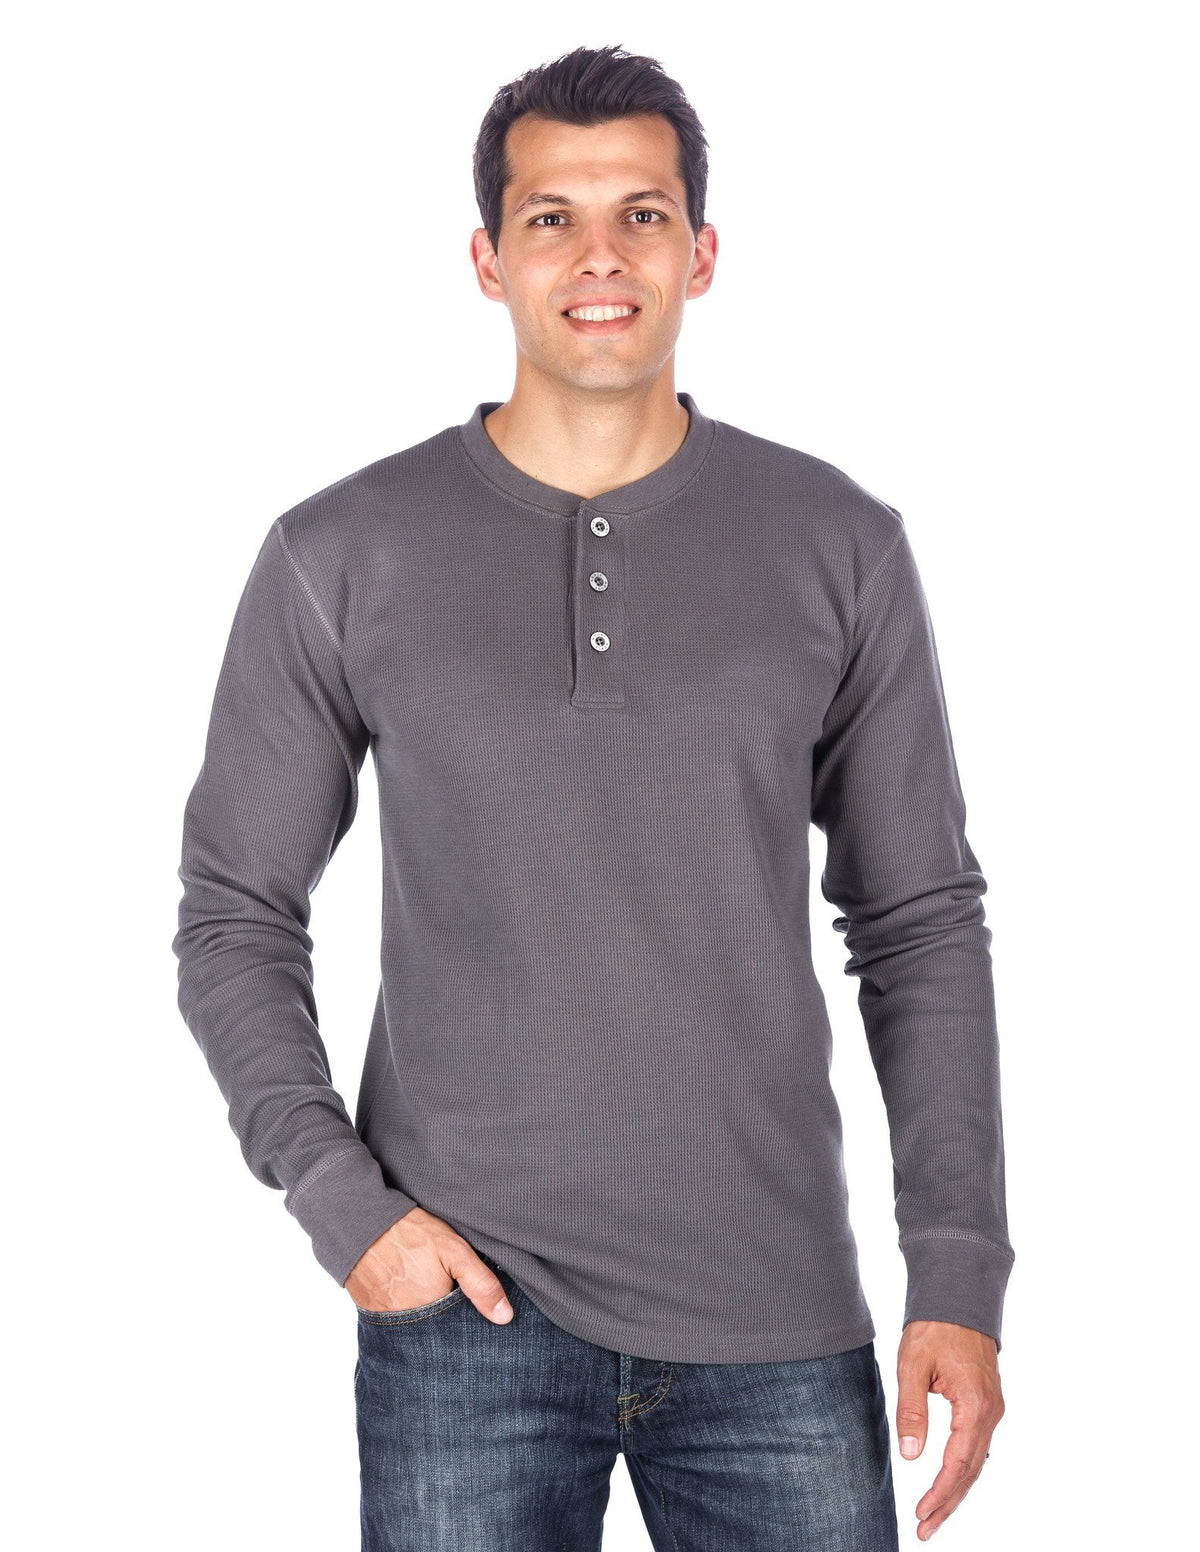 Men's Solid Thermal Henley Long Sleeve T-shirts - Charcoal Gray